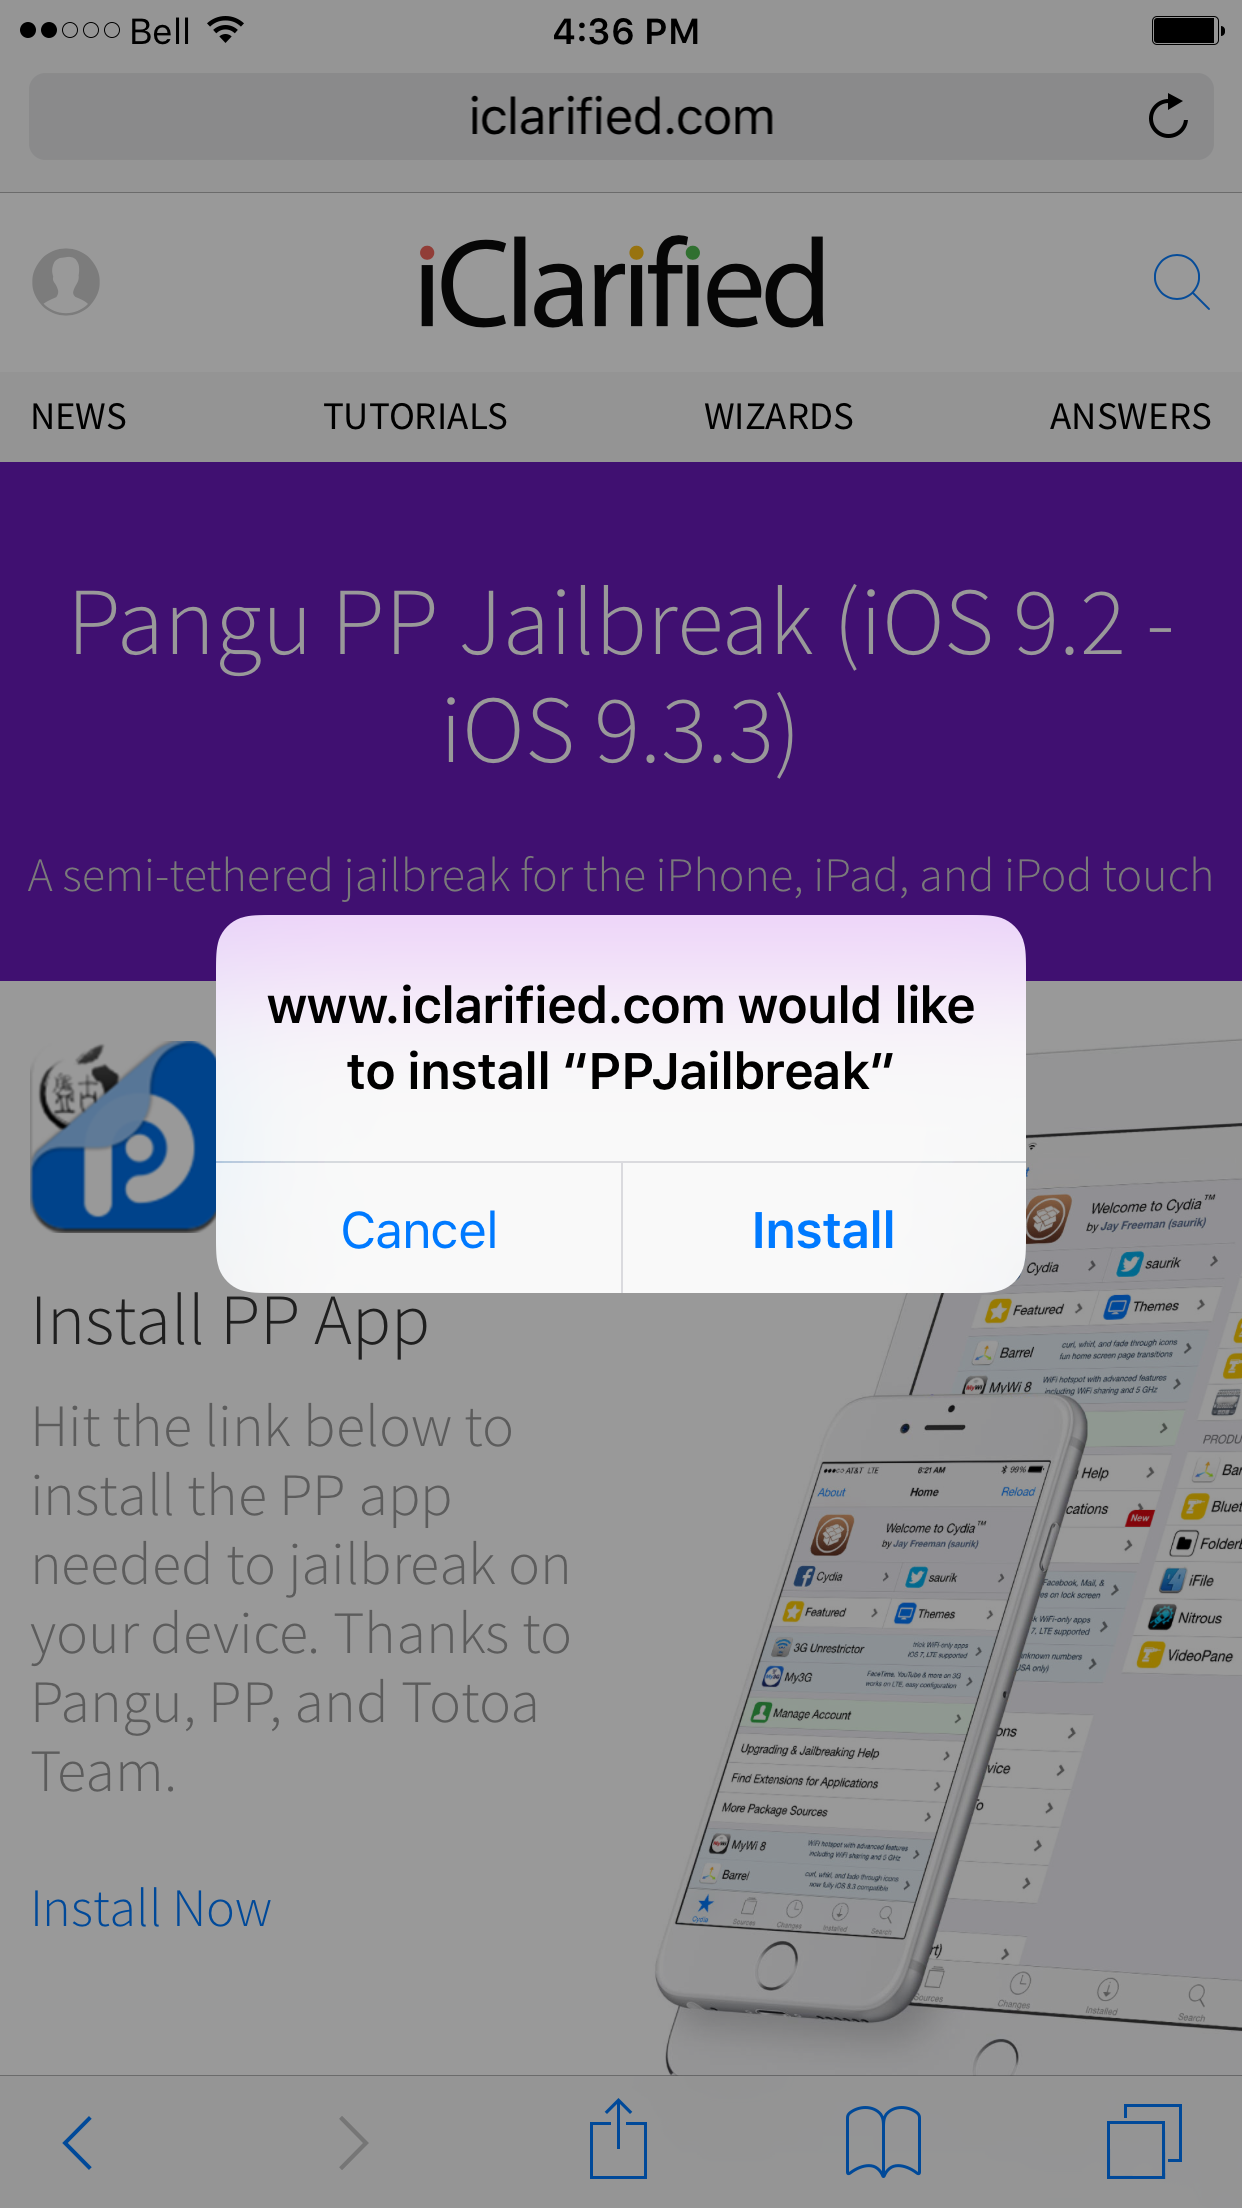 How to Jailbreak Your iPhone on iOS 9.2 - 9.3.3 Without a Computer